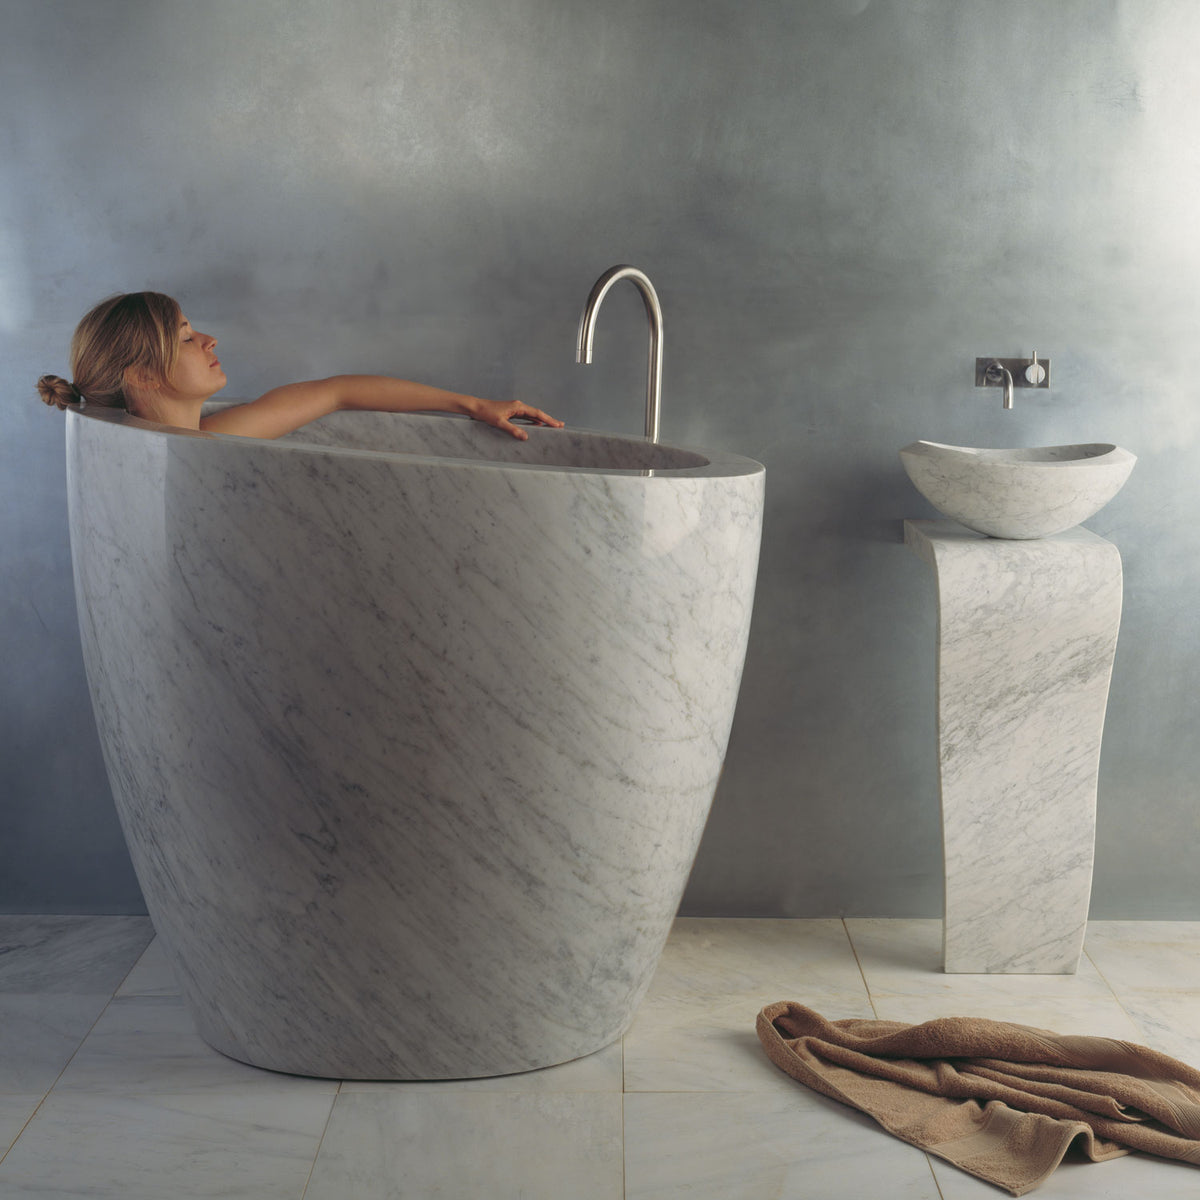 The free standing Stone Forest Eau Soaking Bathtub is hand-carved from a solid block of Carrara marble. Made on a custom basis. image 1 of 2